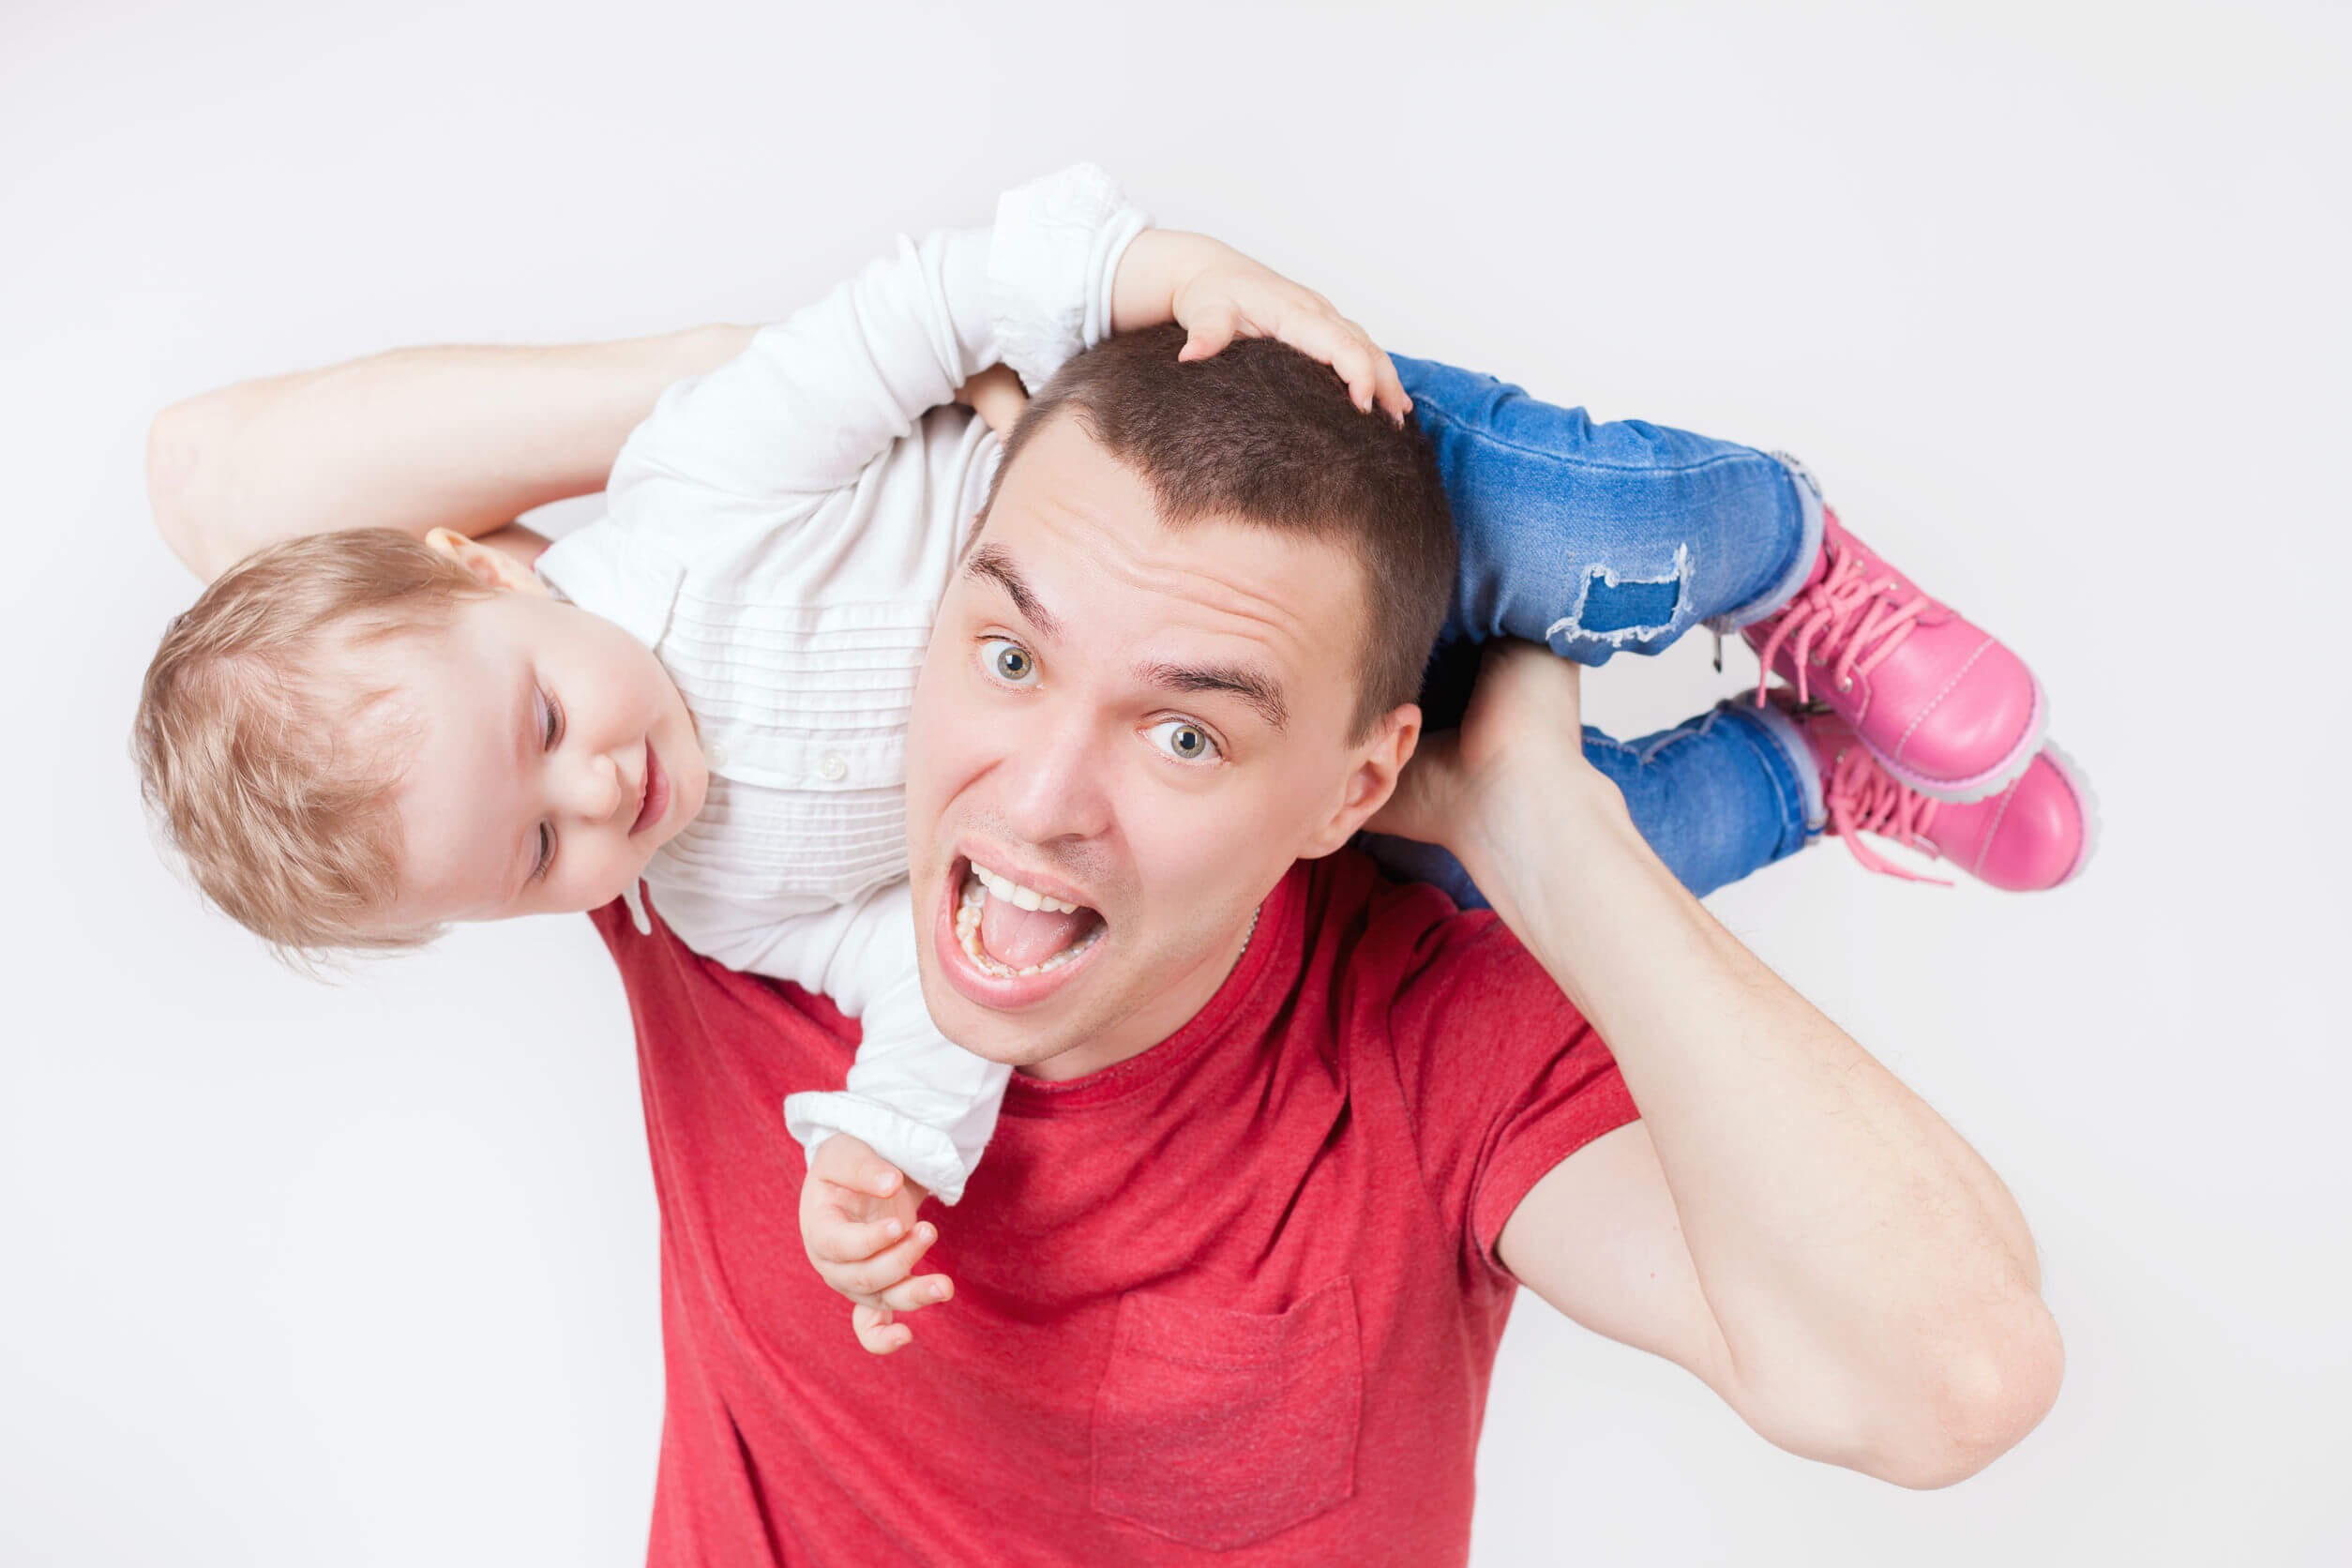 Child Custody for Fathers